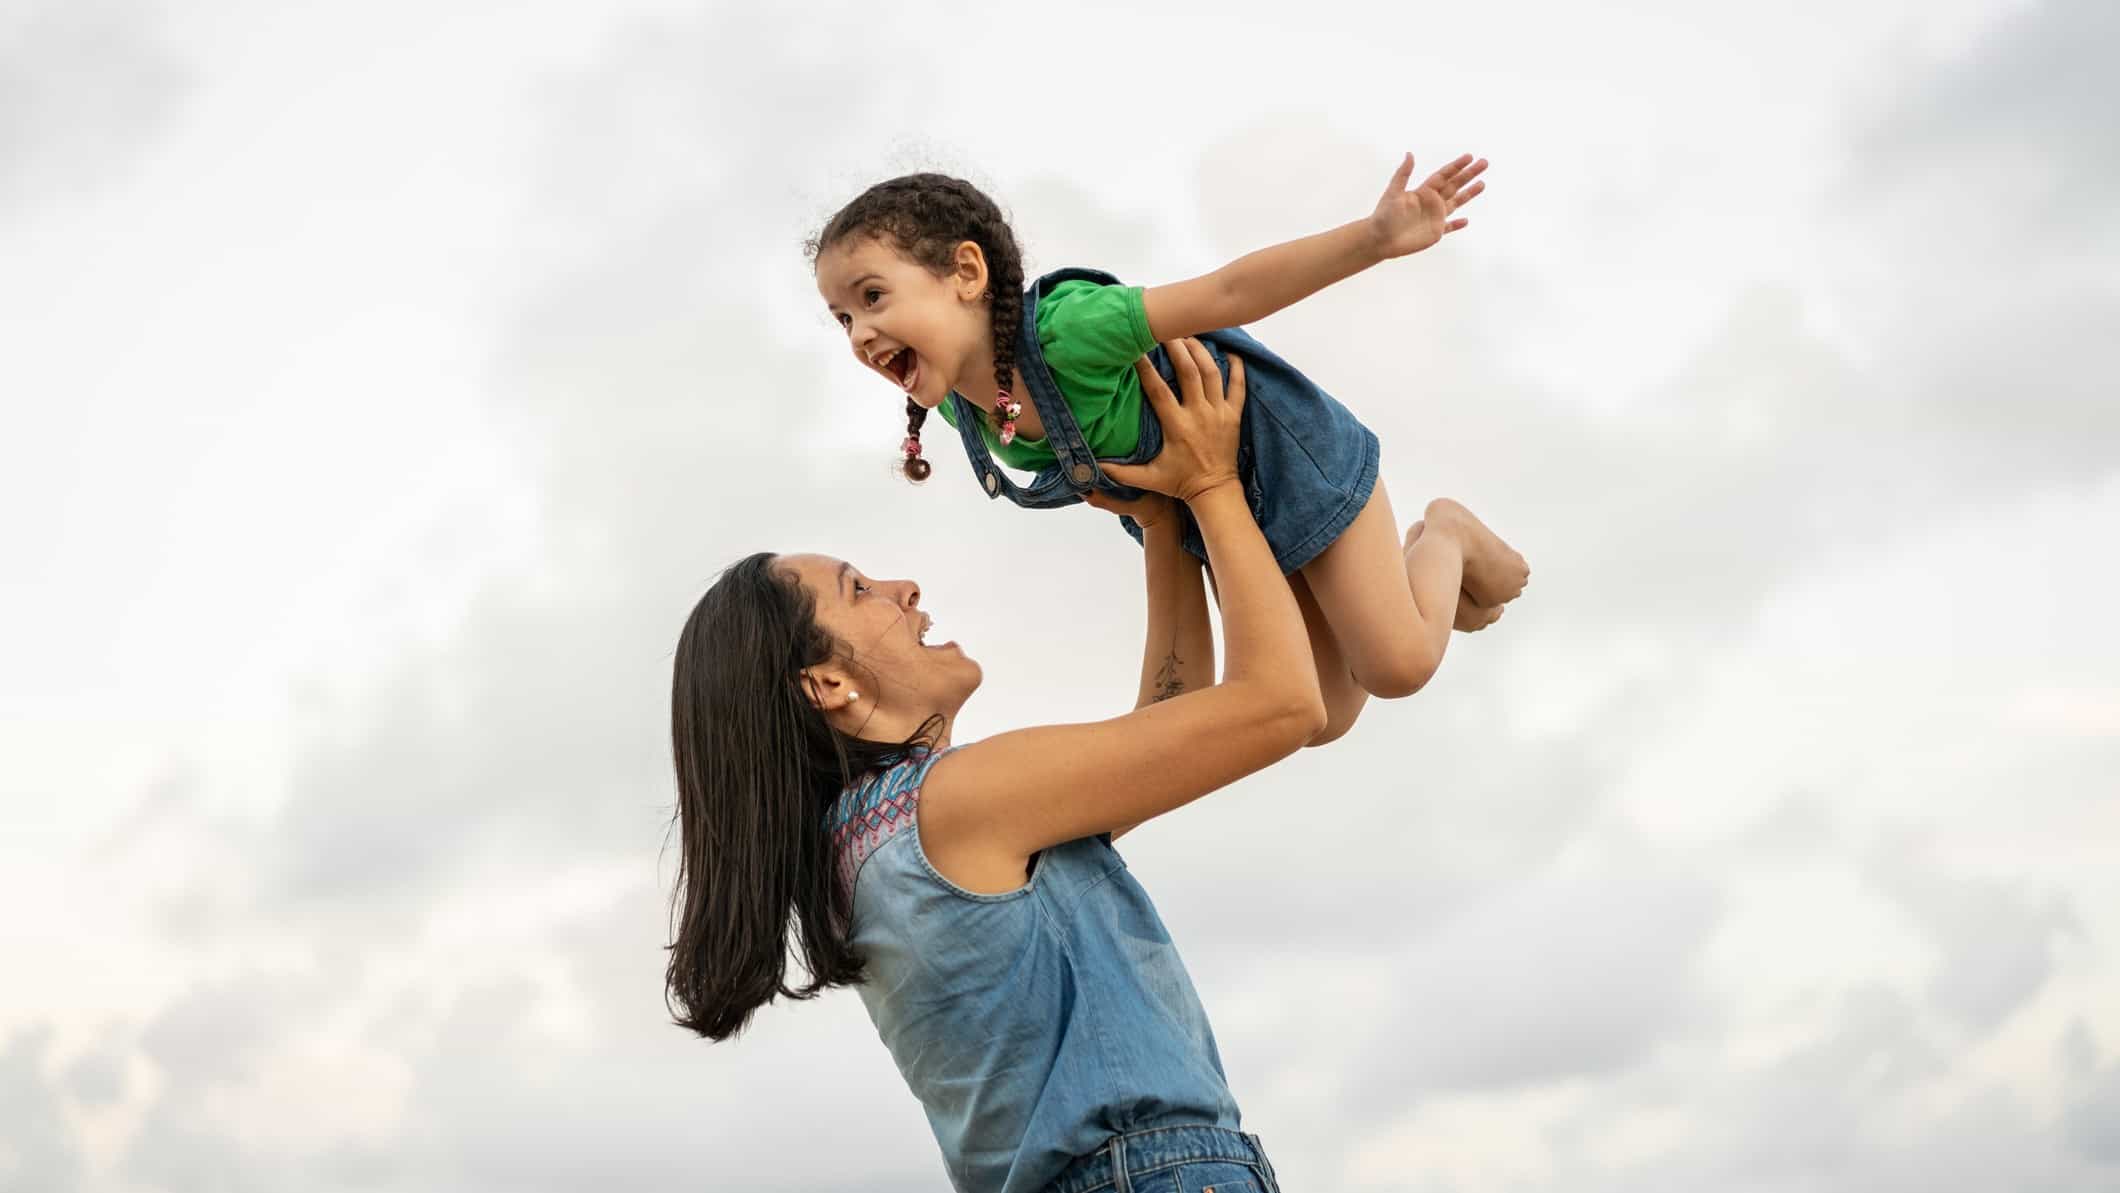 A mum lifts her daughter high into the air so she can fly.